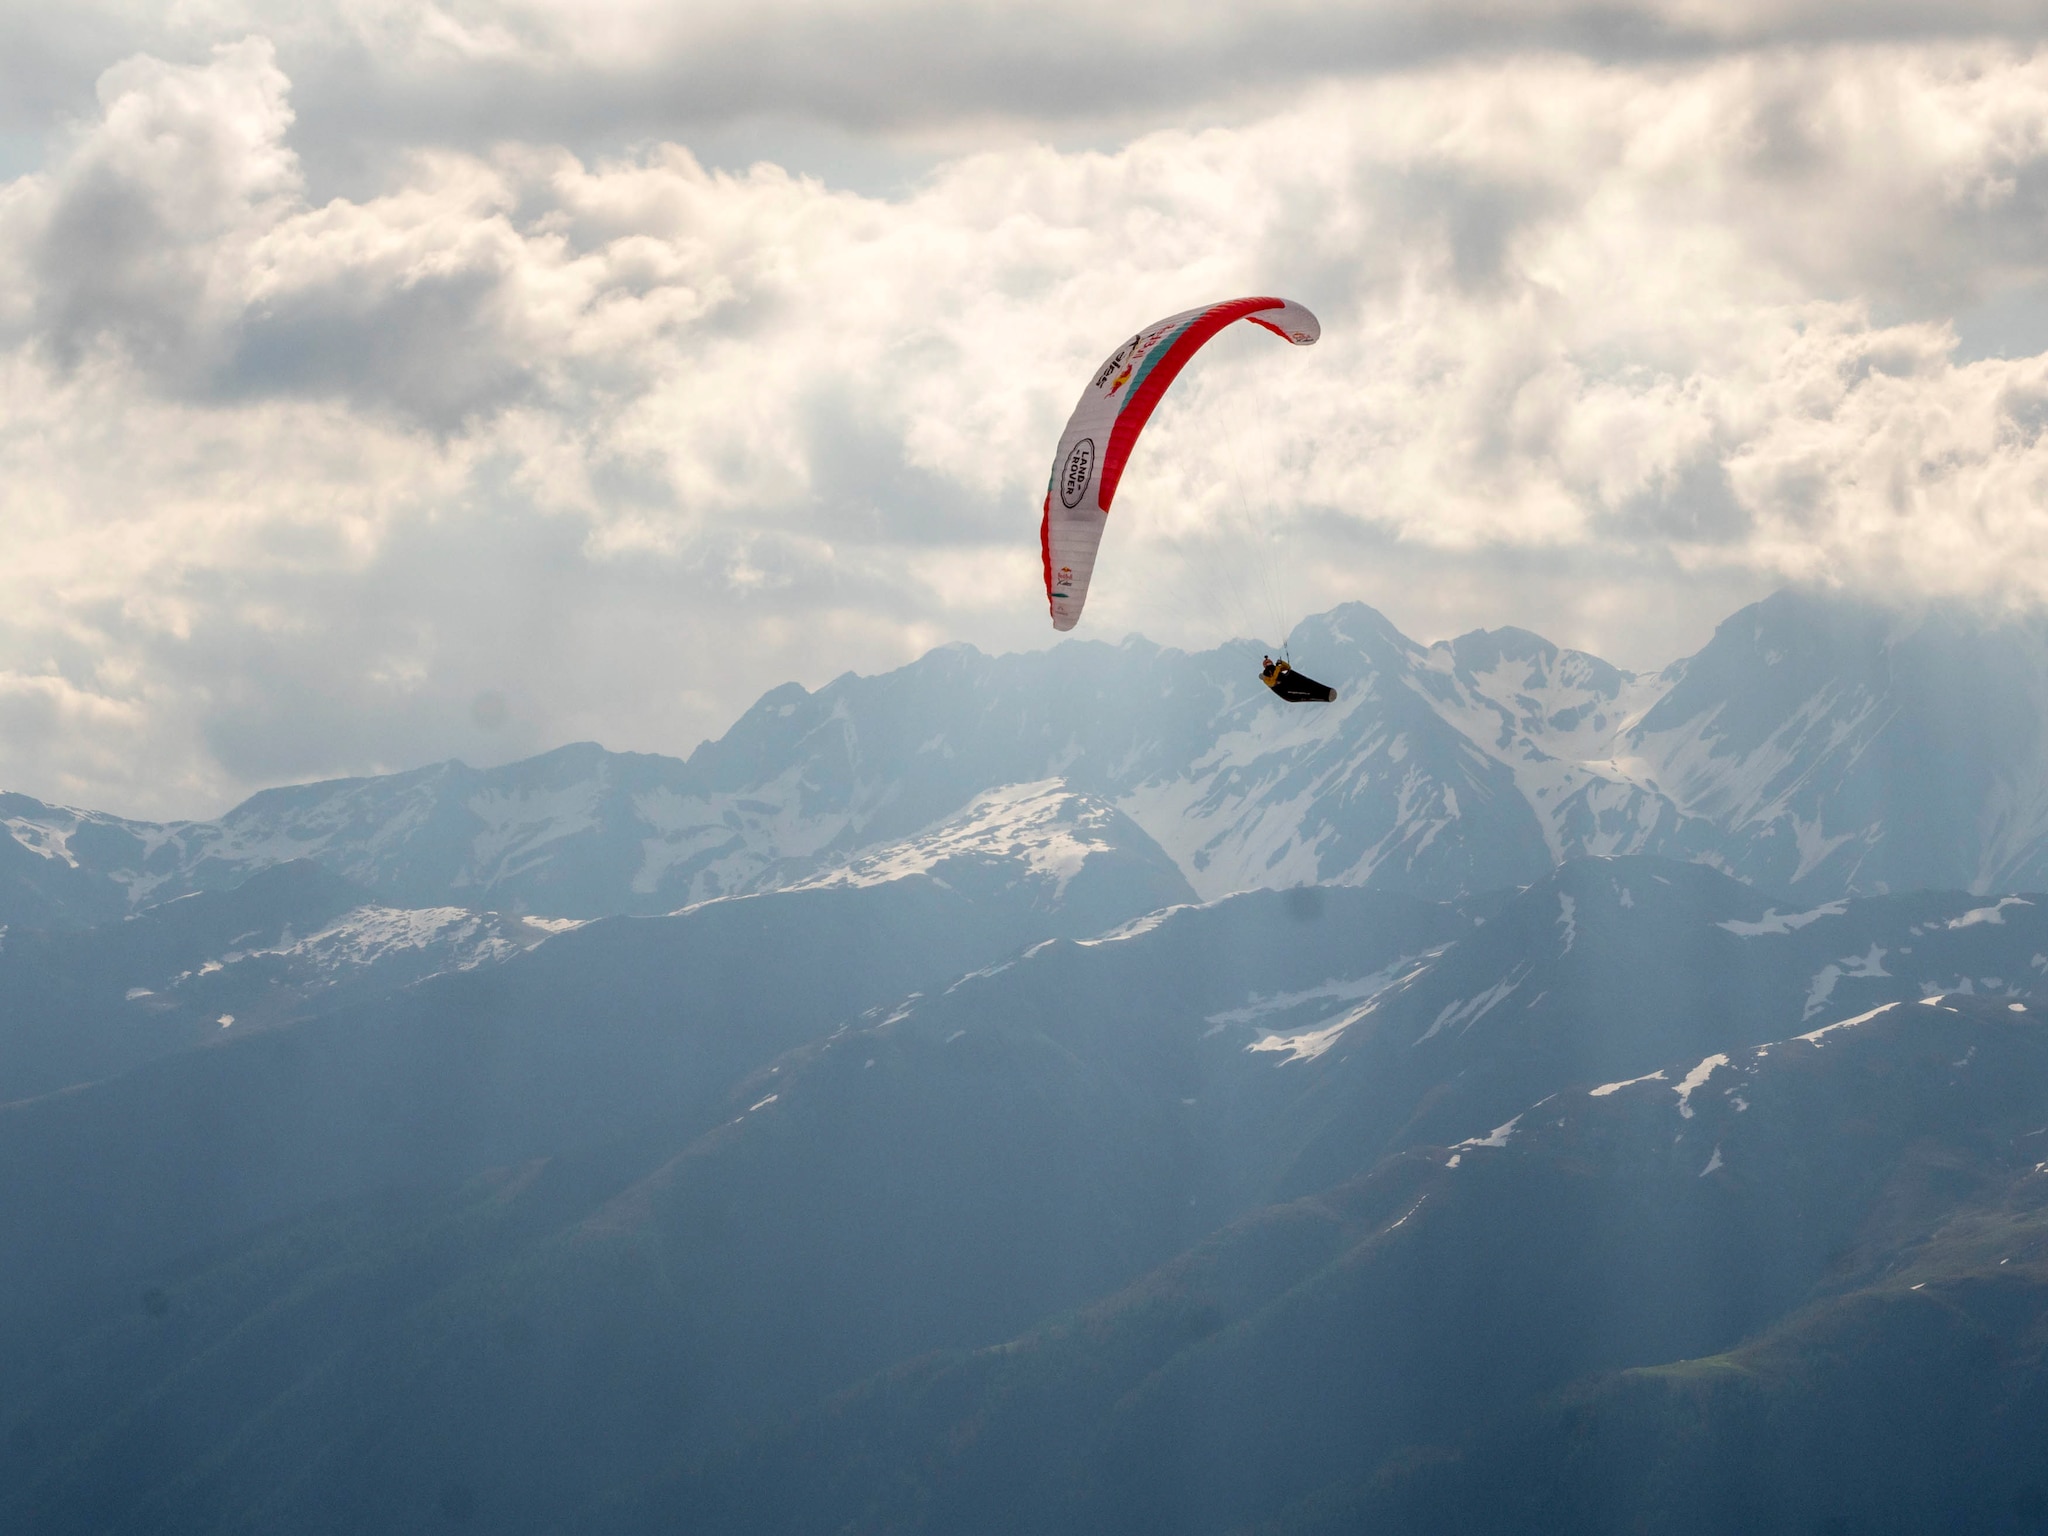 Chrigel Maurer (SUI1) performs during the Red Bull X-Alps 2021 in Fiesch, Switzerland on June 27, 2021